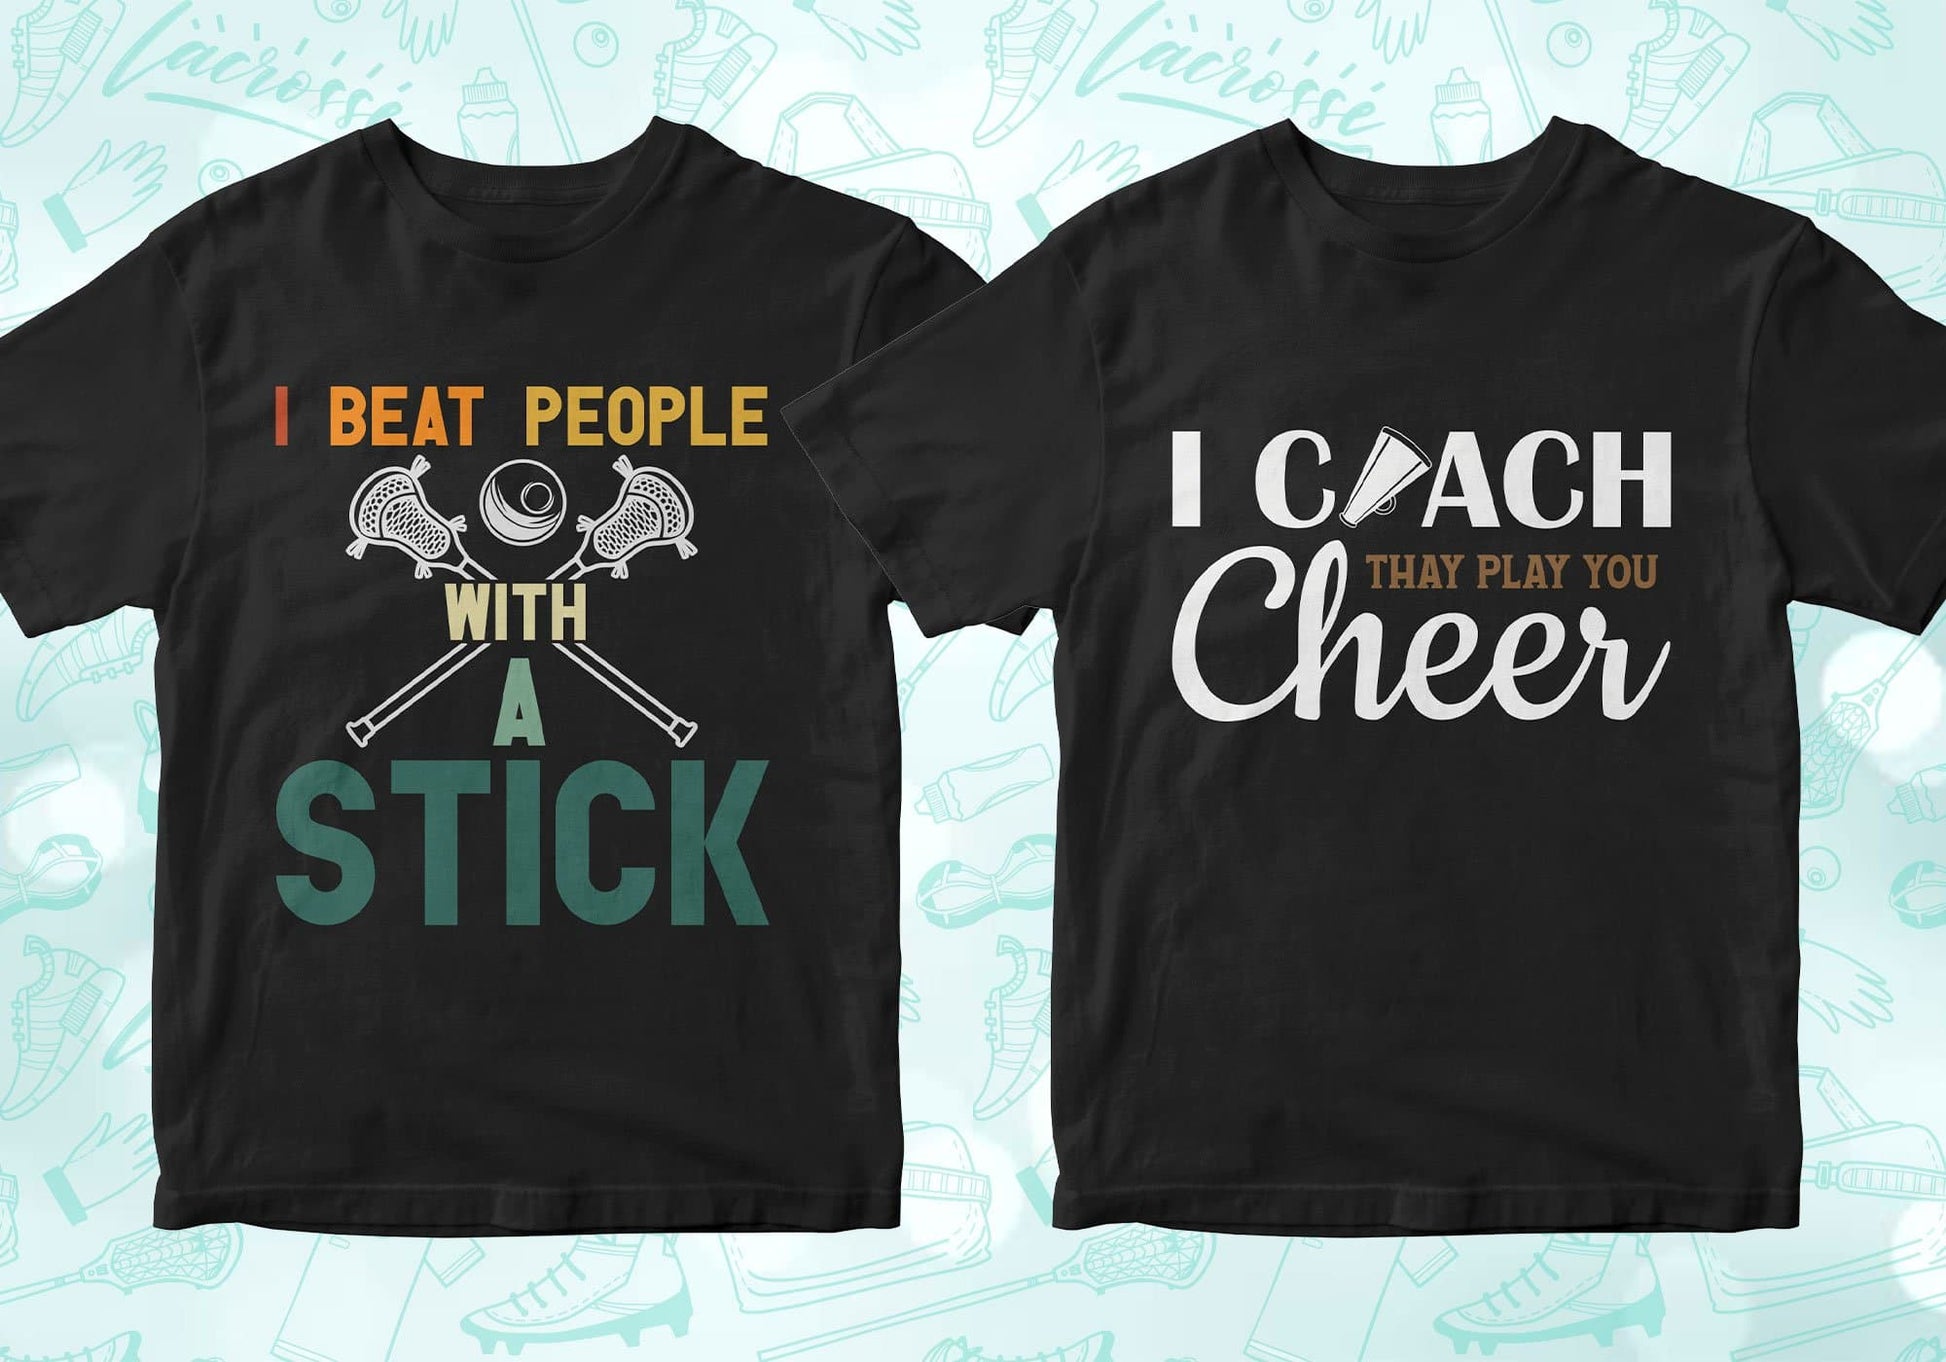 i beat people with a stick, i coach they play you cheer, lacrosse shirts lacrosse tshirt lacrosse t shirts lacrosse shirt designs lacrosse graphic